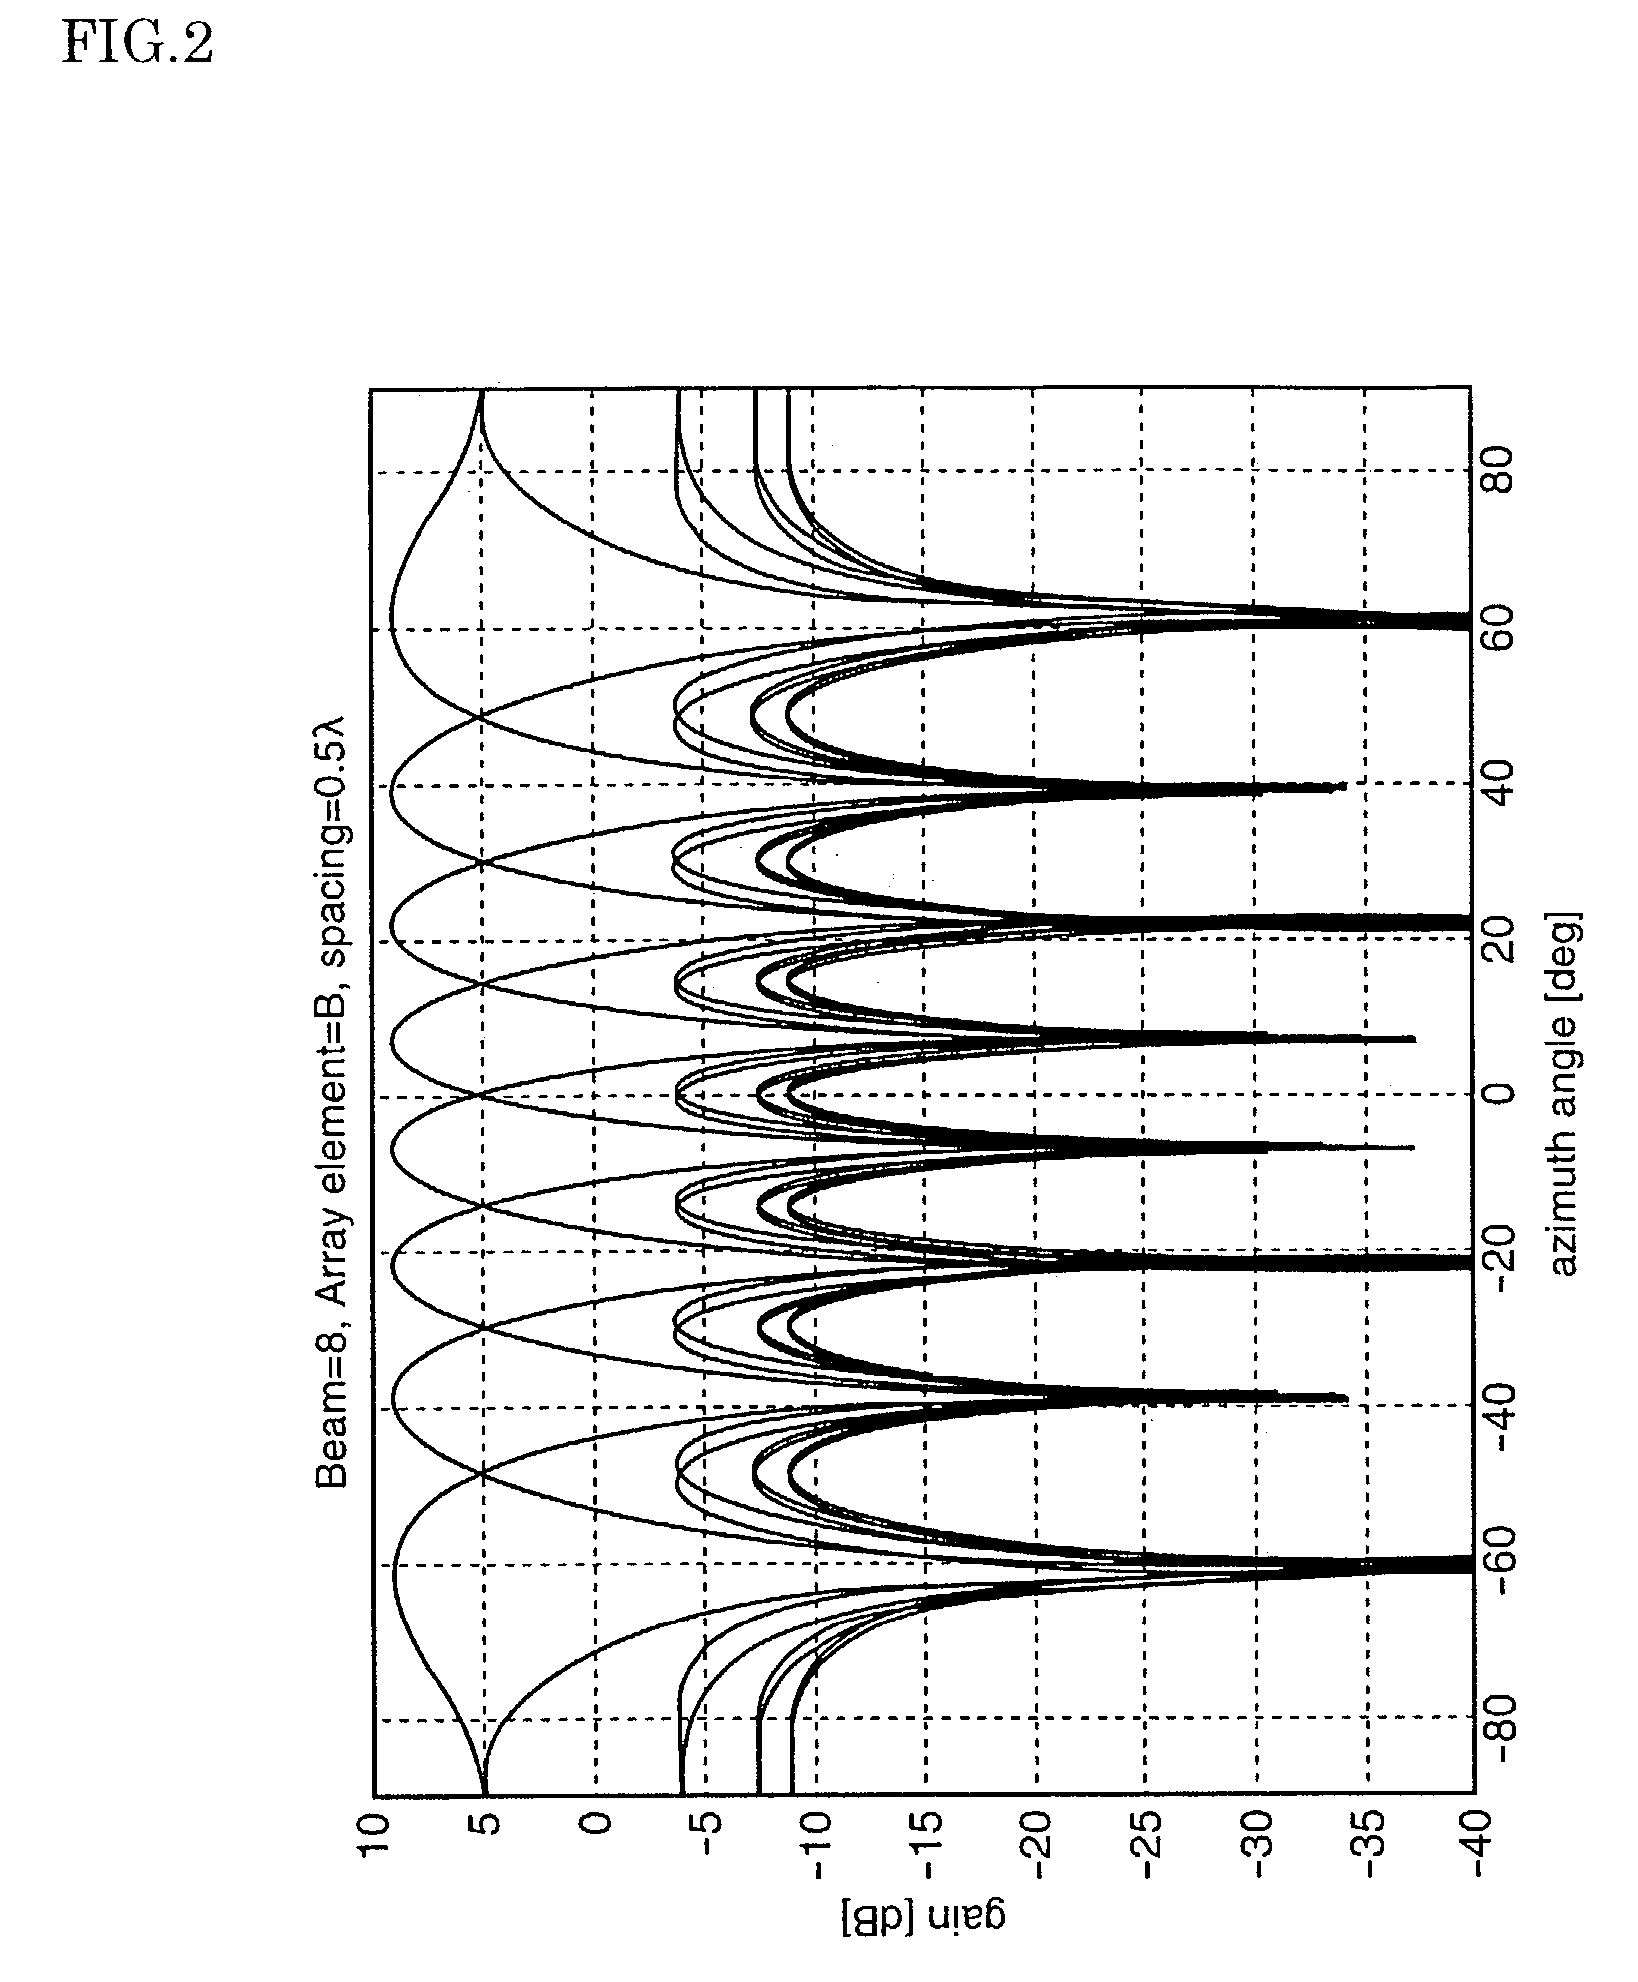 Path search circuit, radio receiver and radio transmitter, utilizing a directional beam